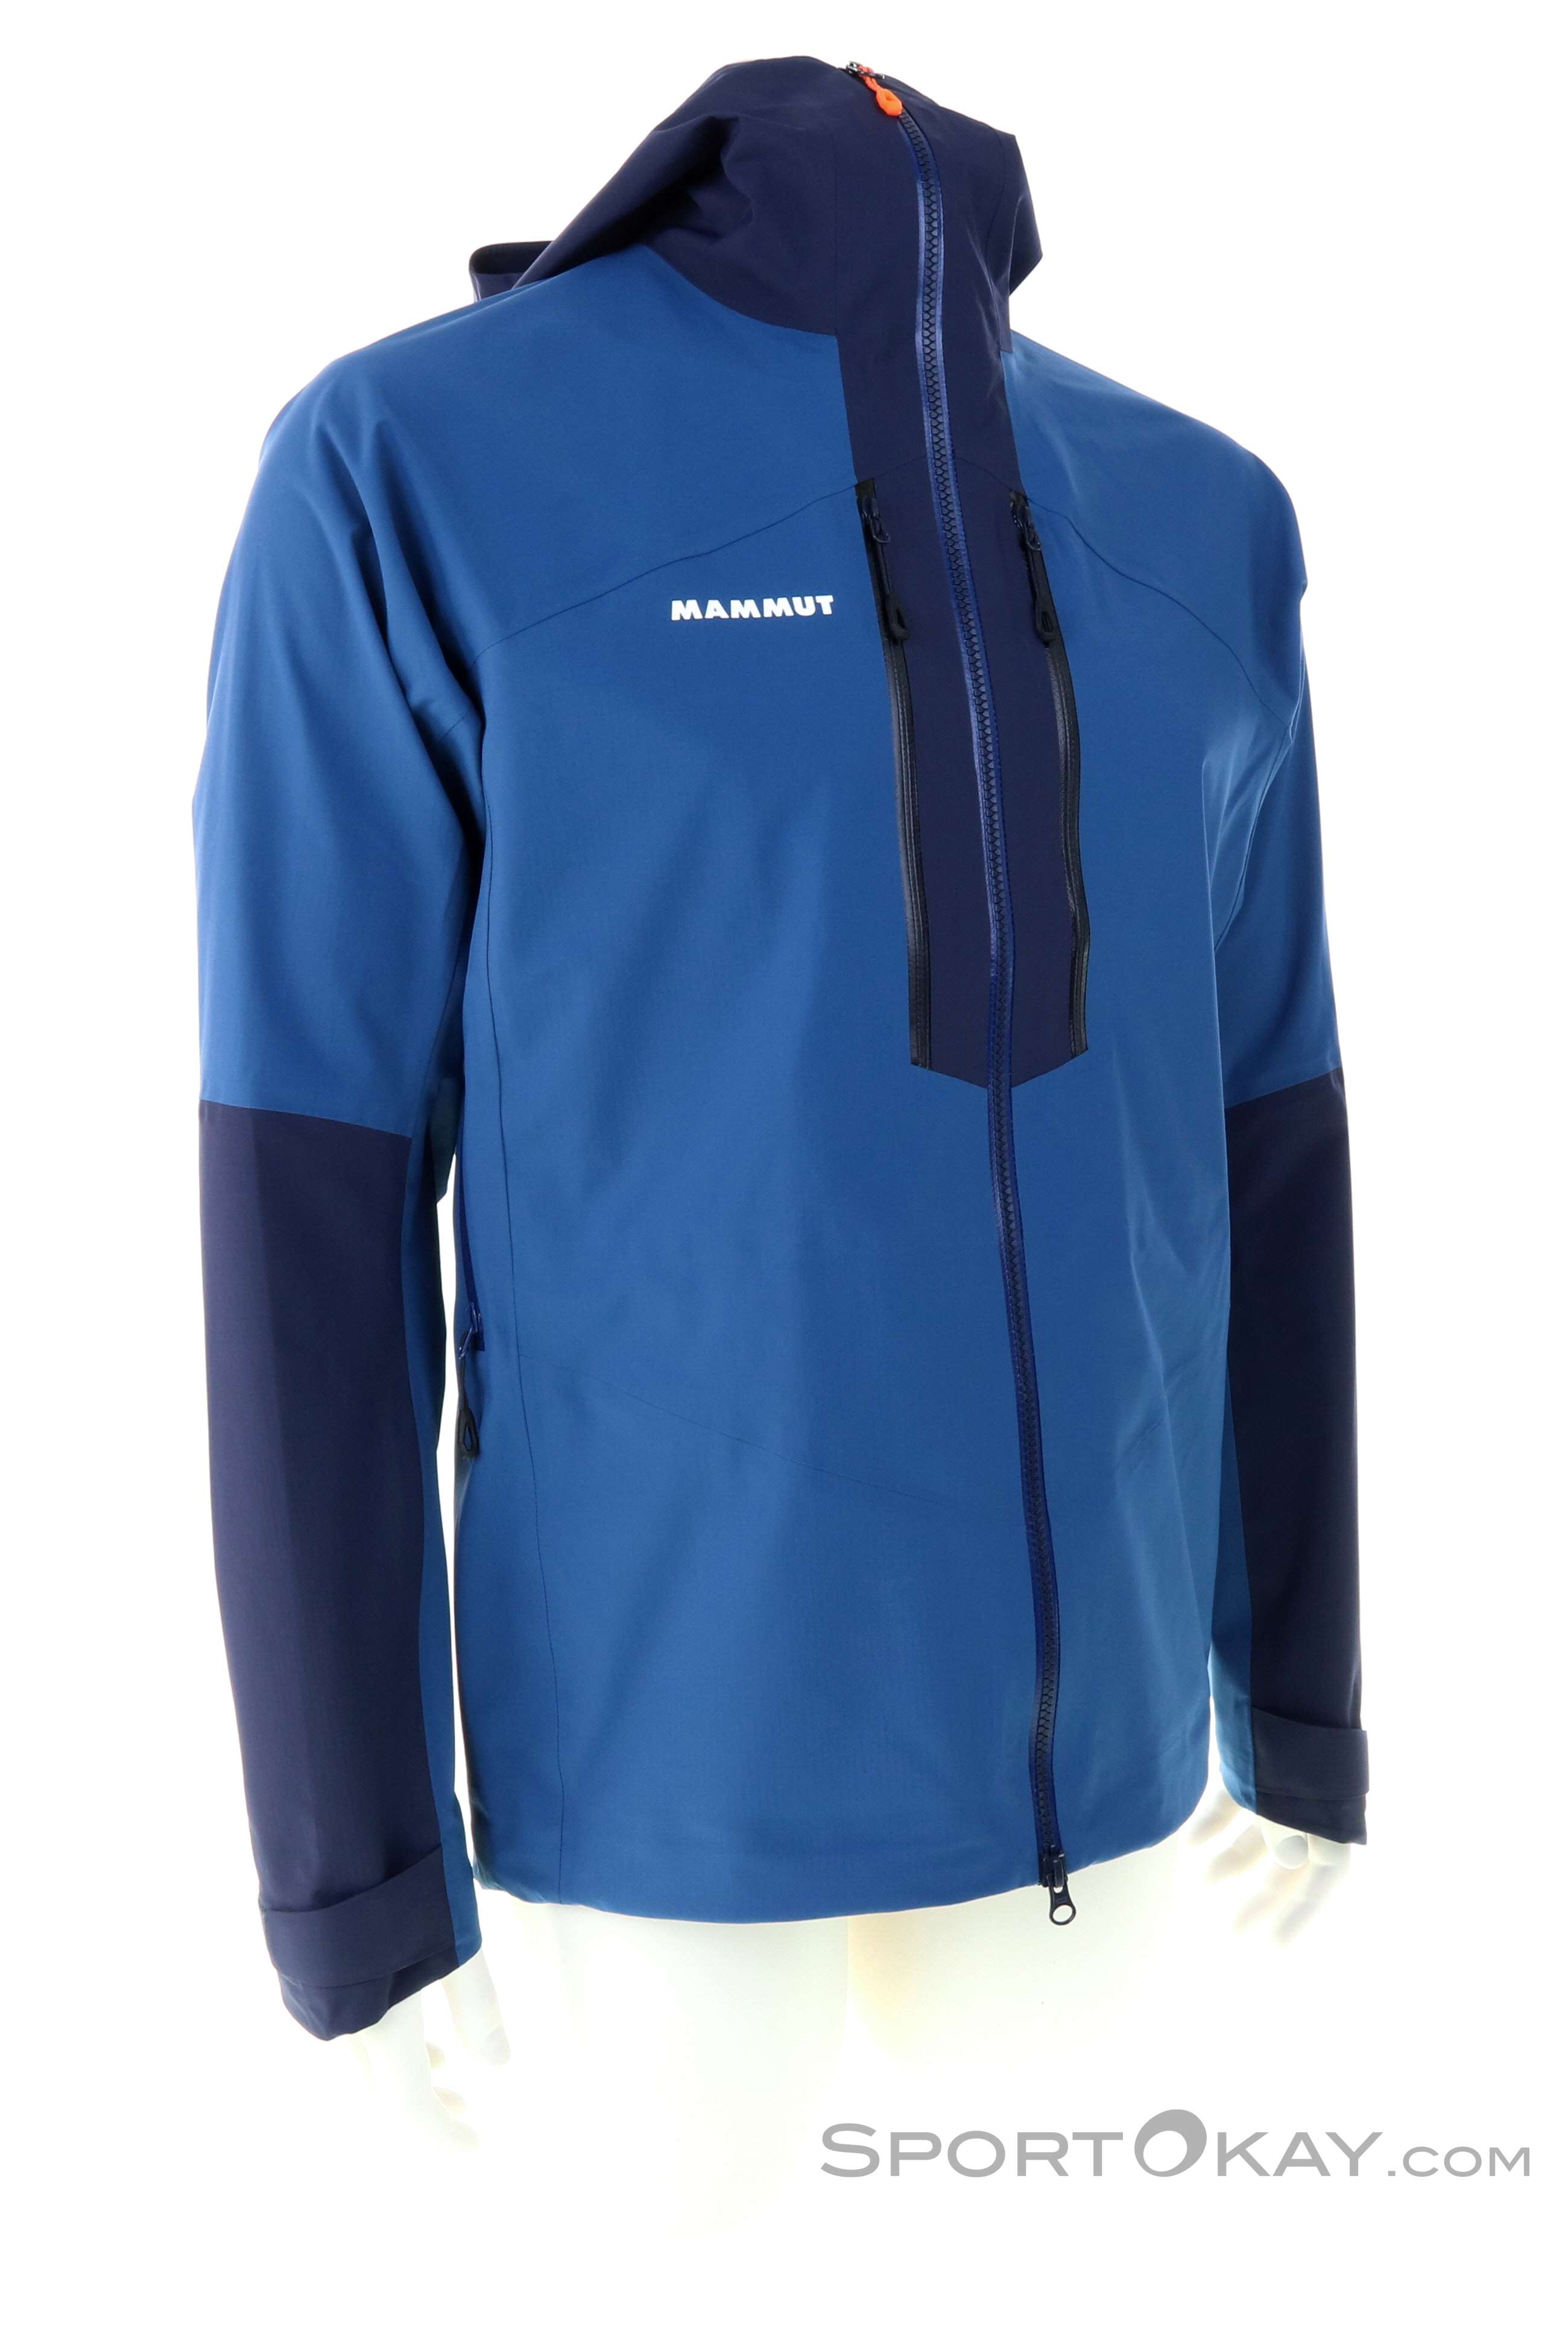 Mammut Taiss Jackets All Jacket Touring - Mens - - HS Outdoor Clothing Outdoor Ski 